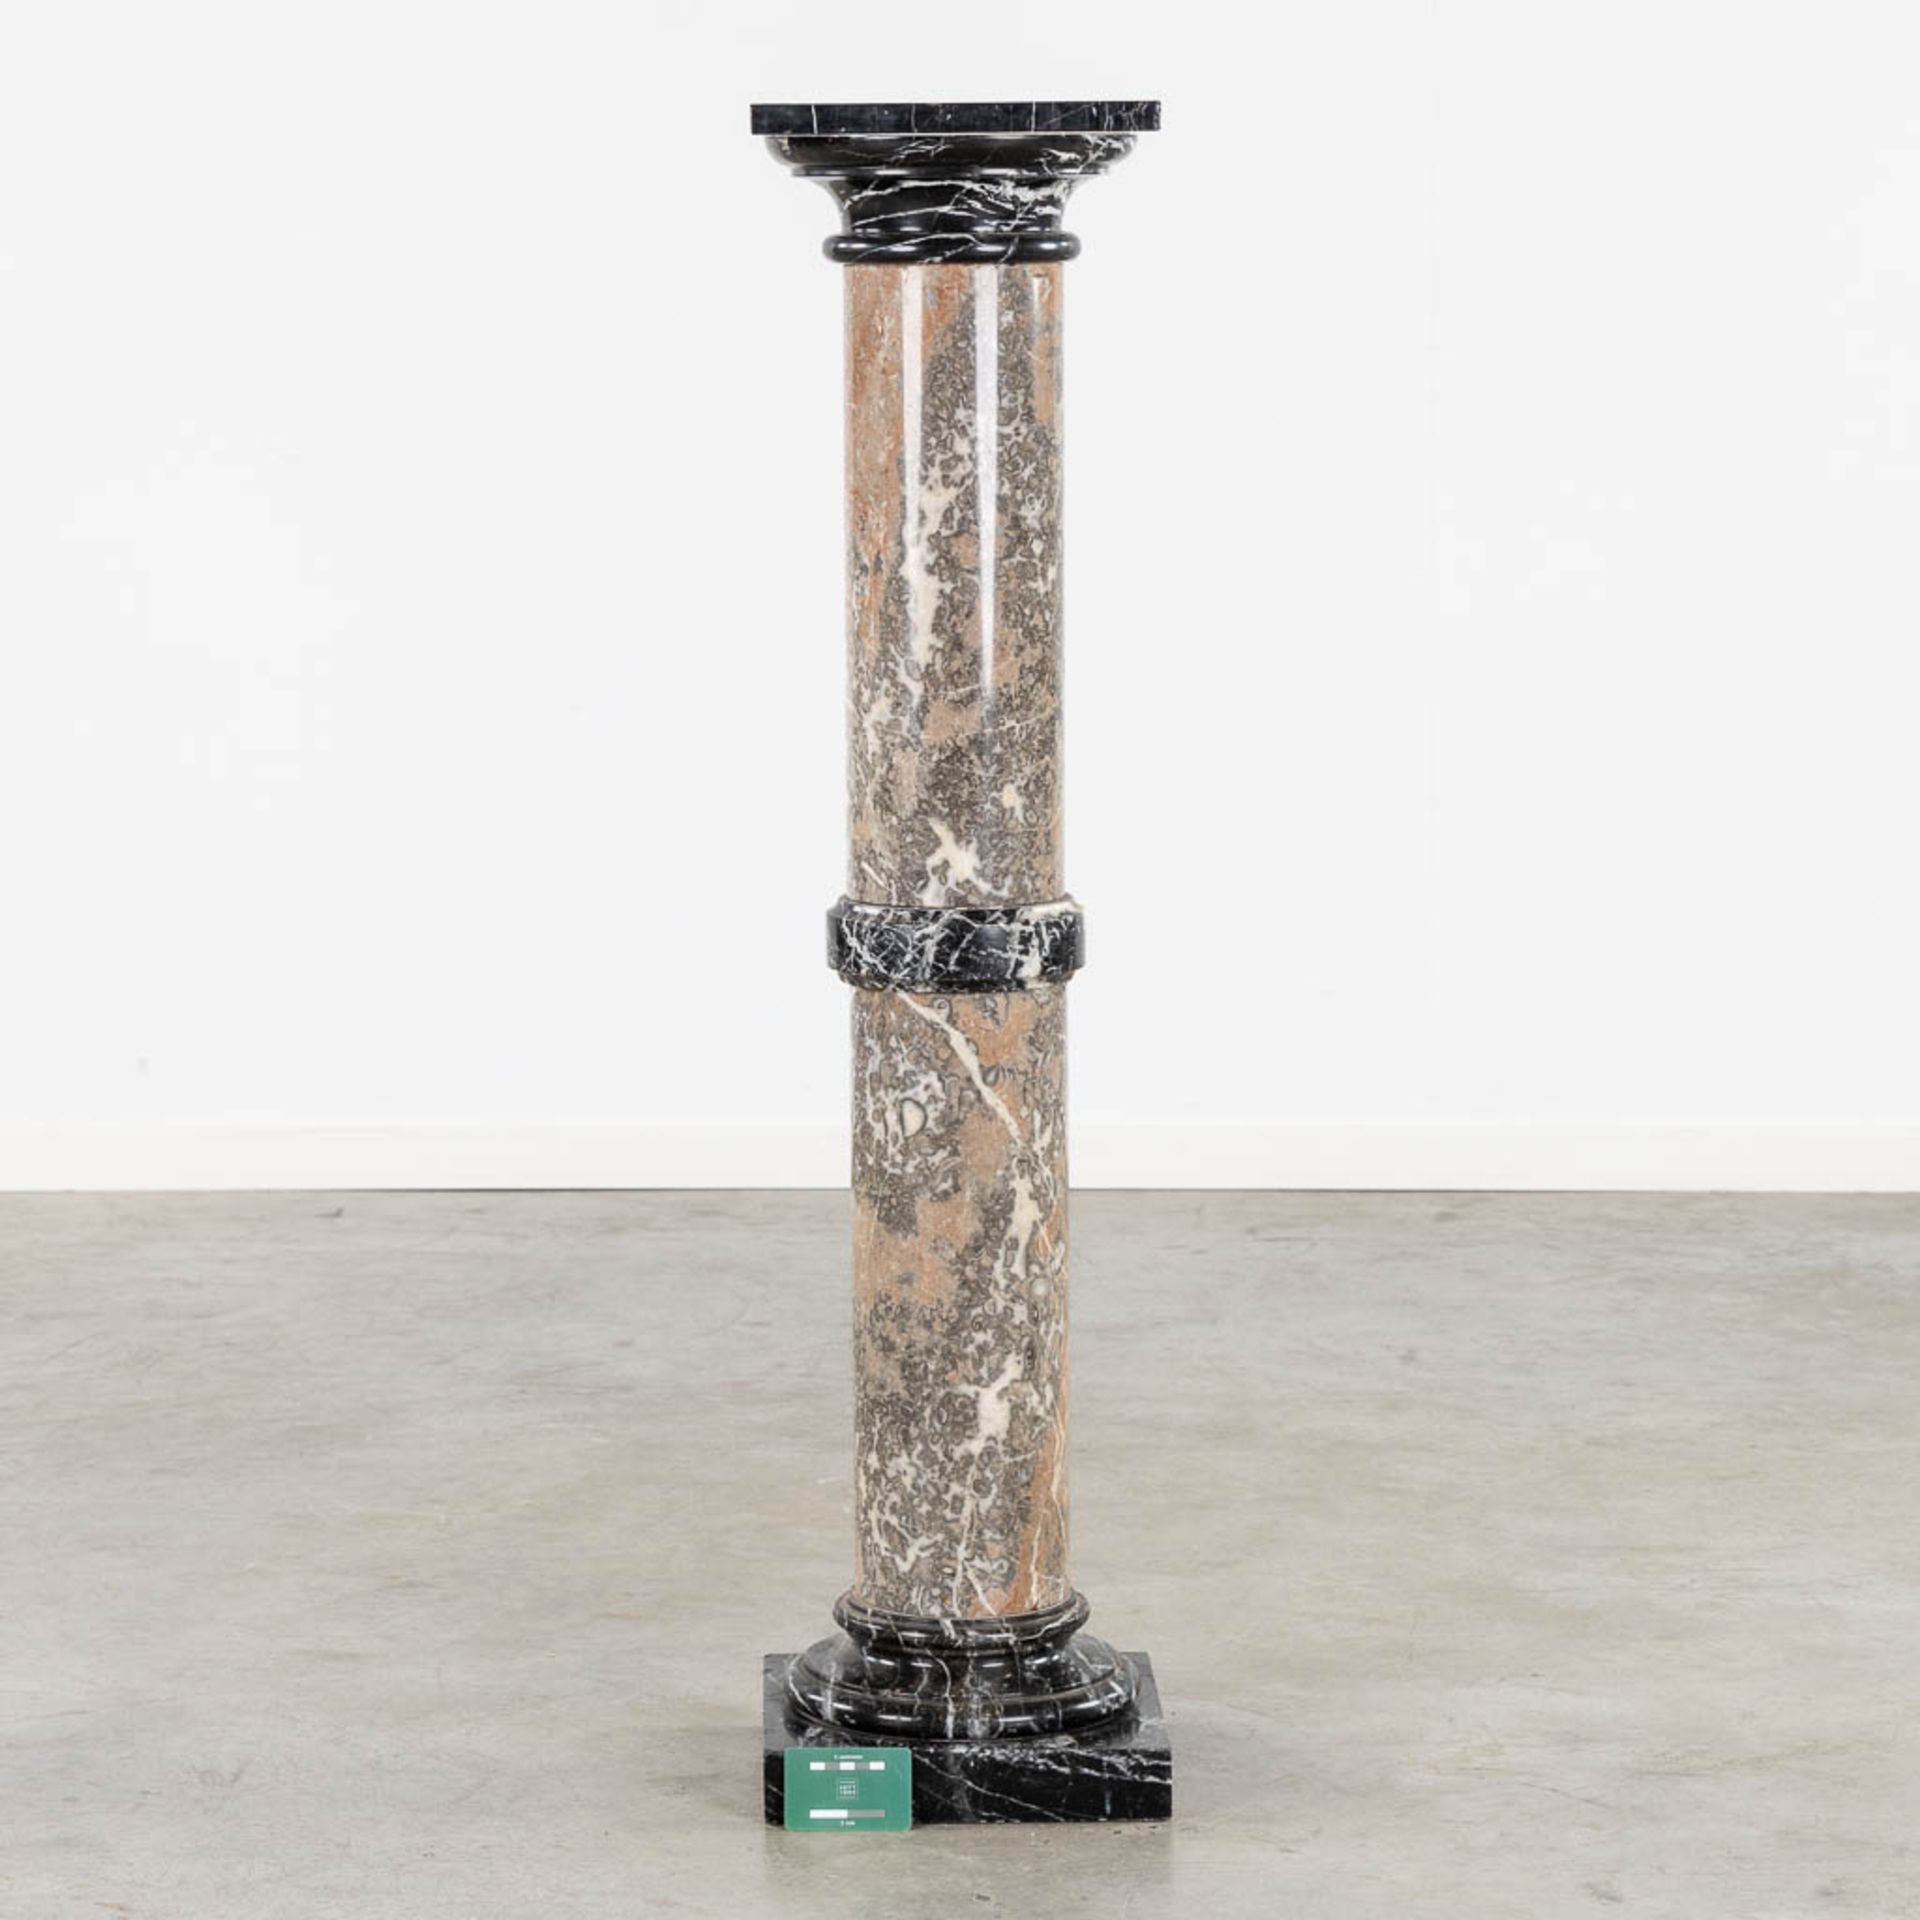 An antique pedestal, black, grey and brown marble. Circa 1900. (L:27 x W:27 x H:115 cm) - Image 2 of 9